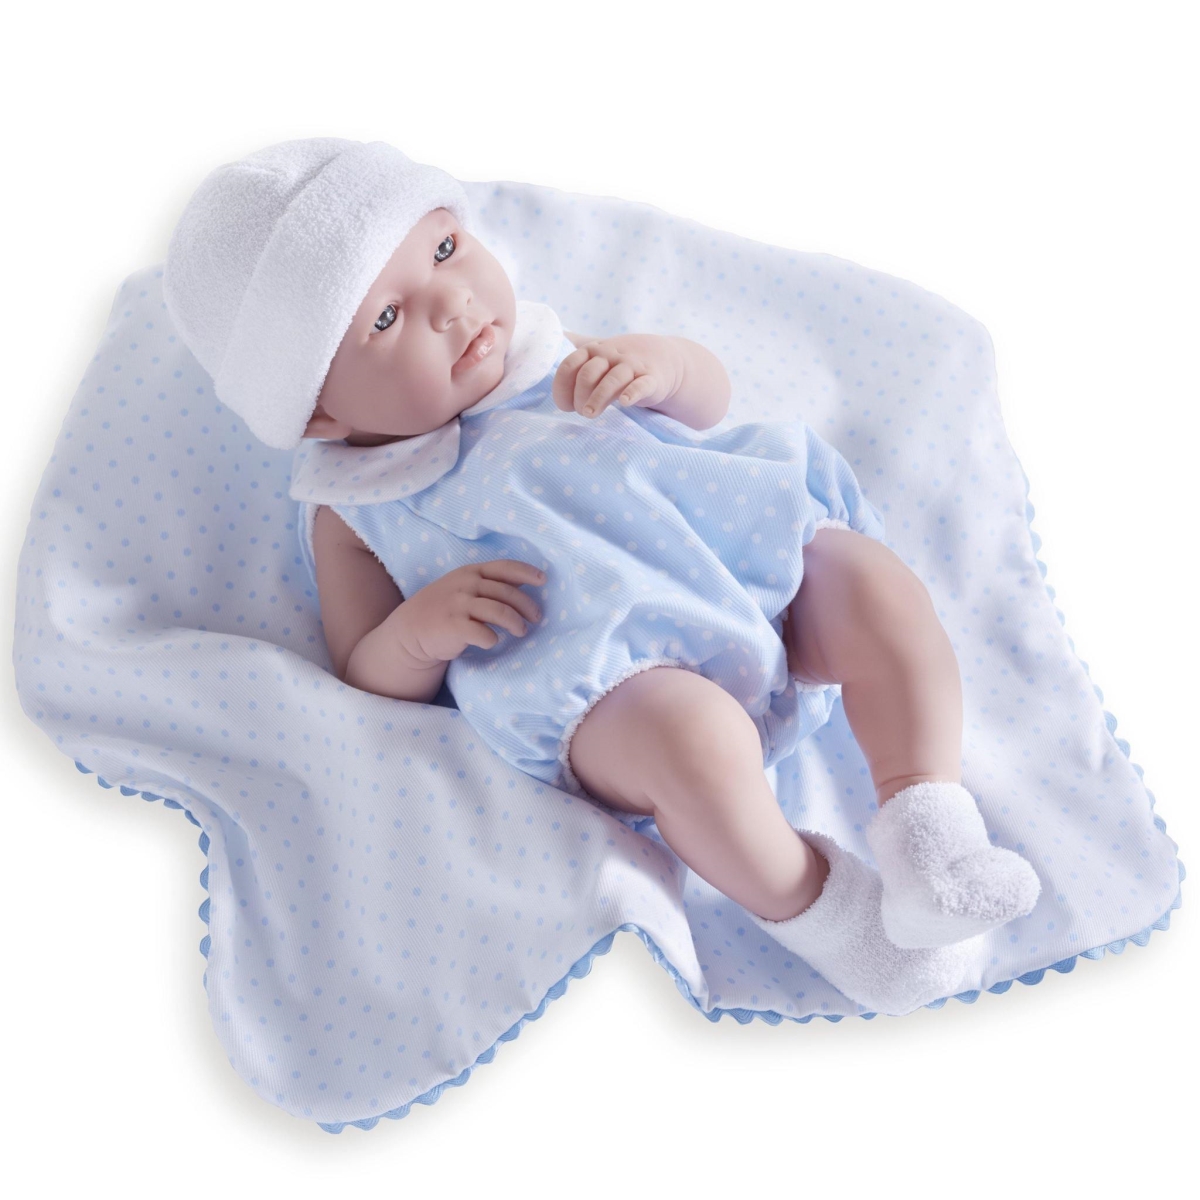 Picture of La Newborn All-Vinyl 17 in. Real Boy Baby Doll - Blue Bubble Suit &amp; Blanket